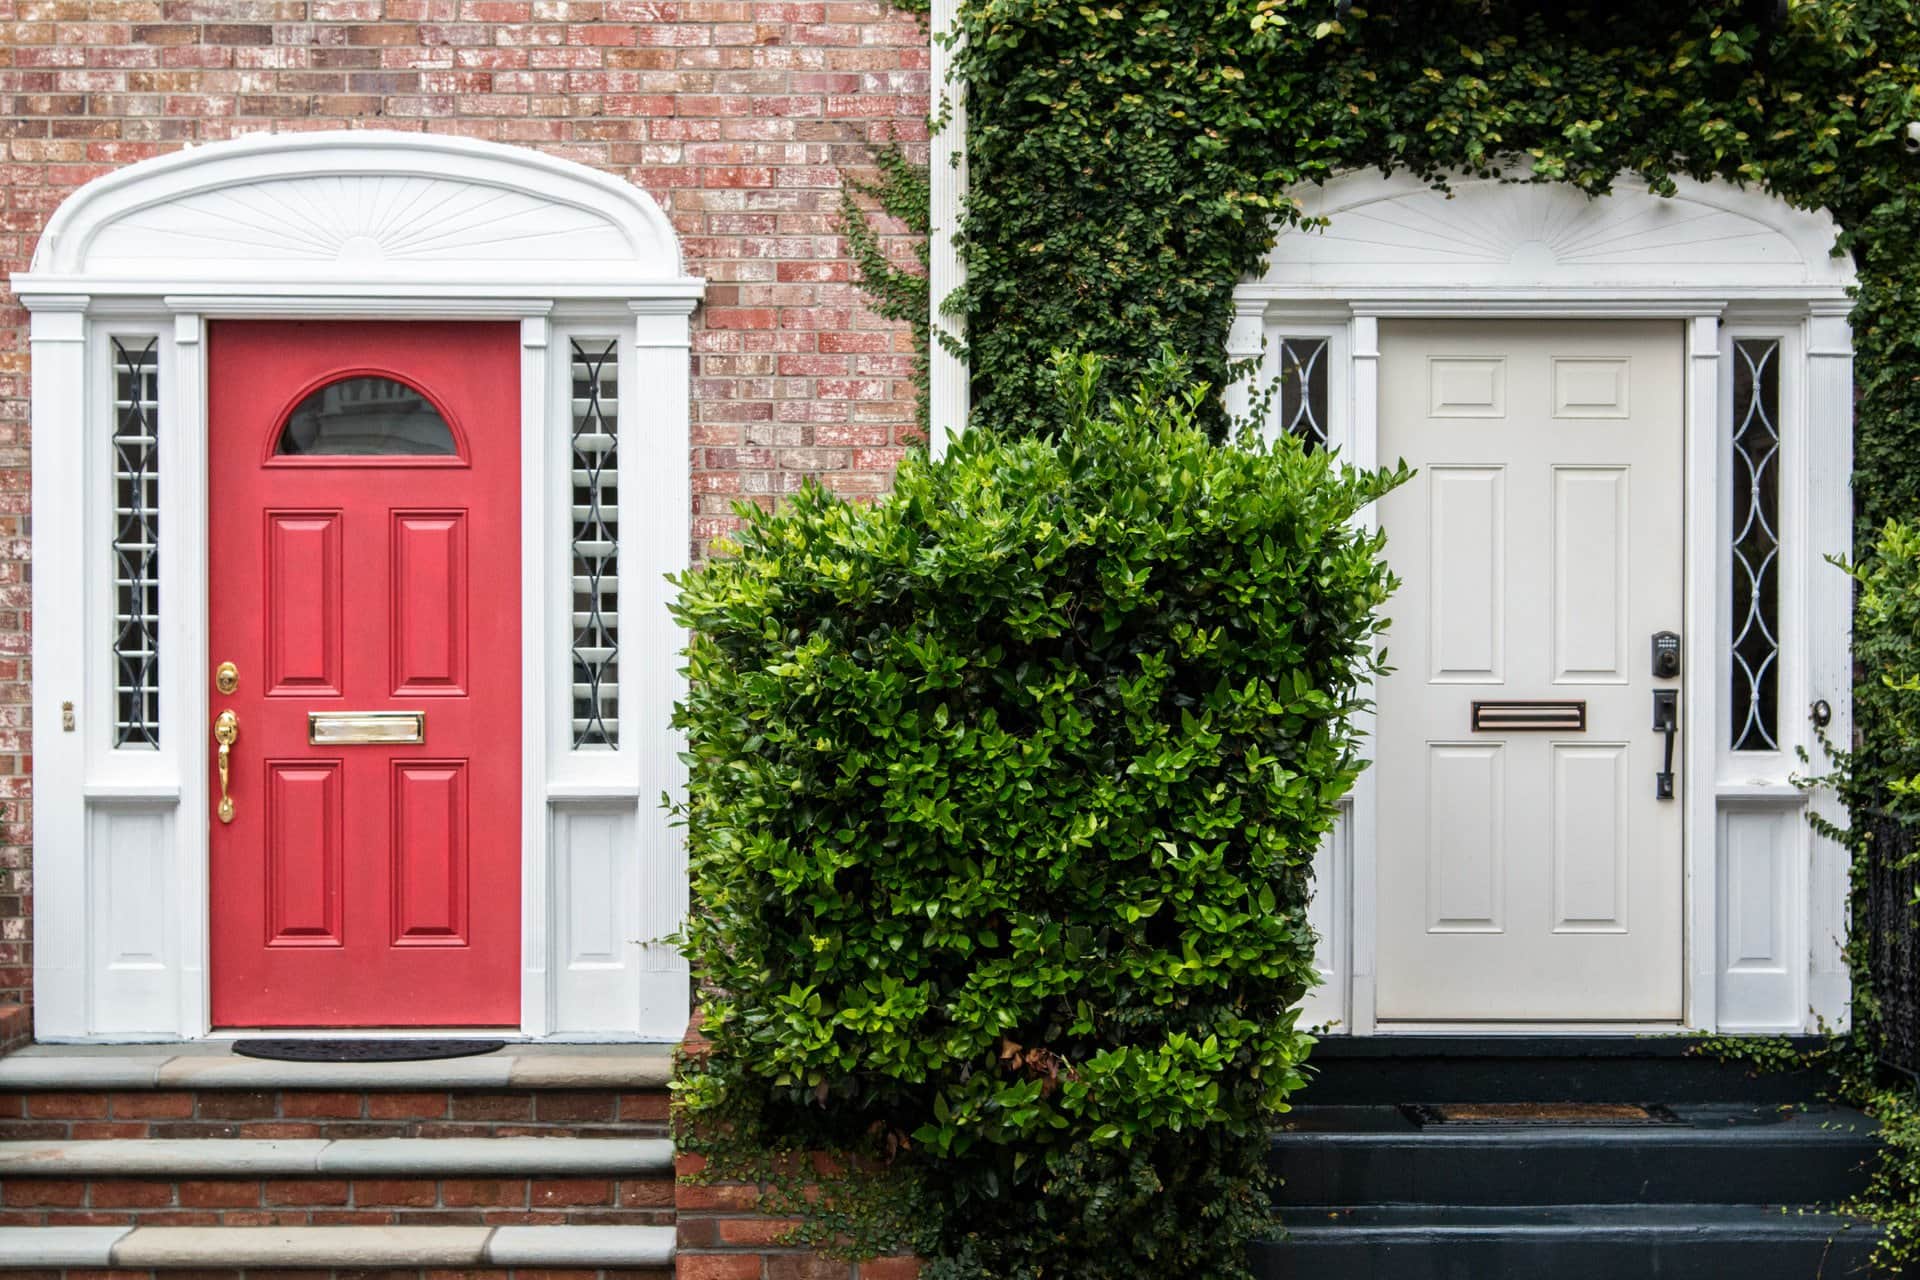 2. Fiberglass Doors with and without Windows